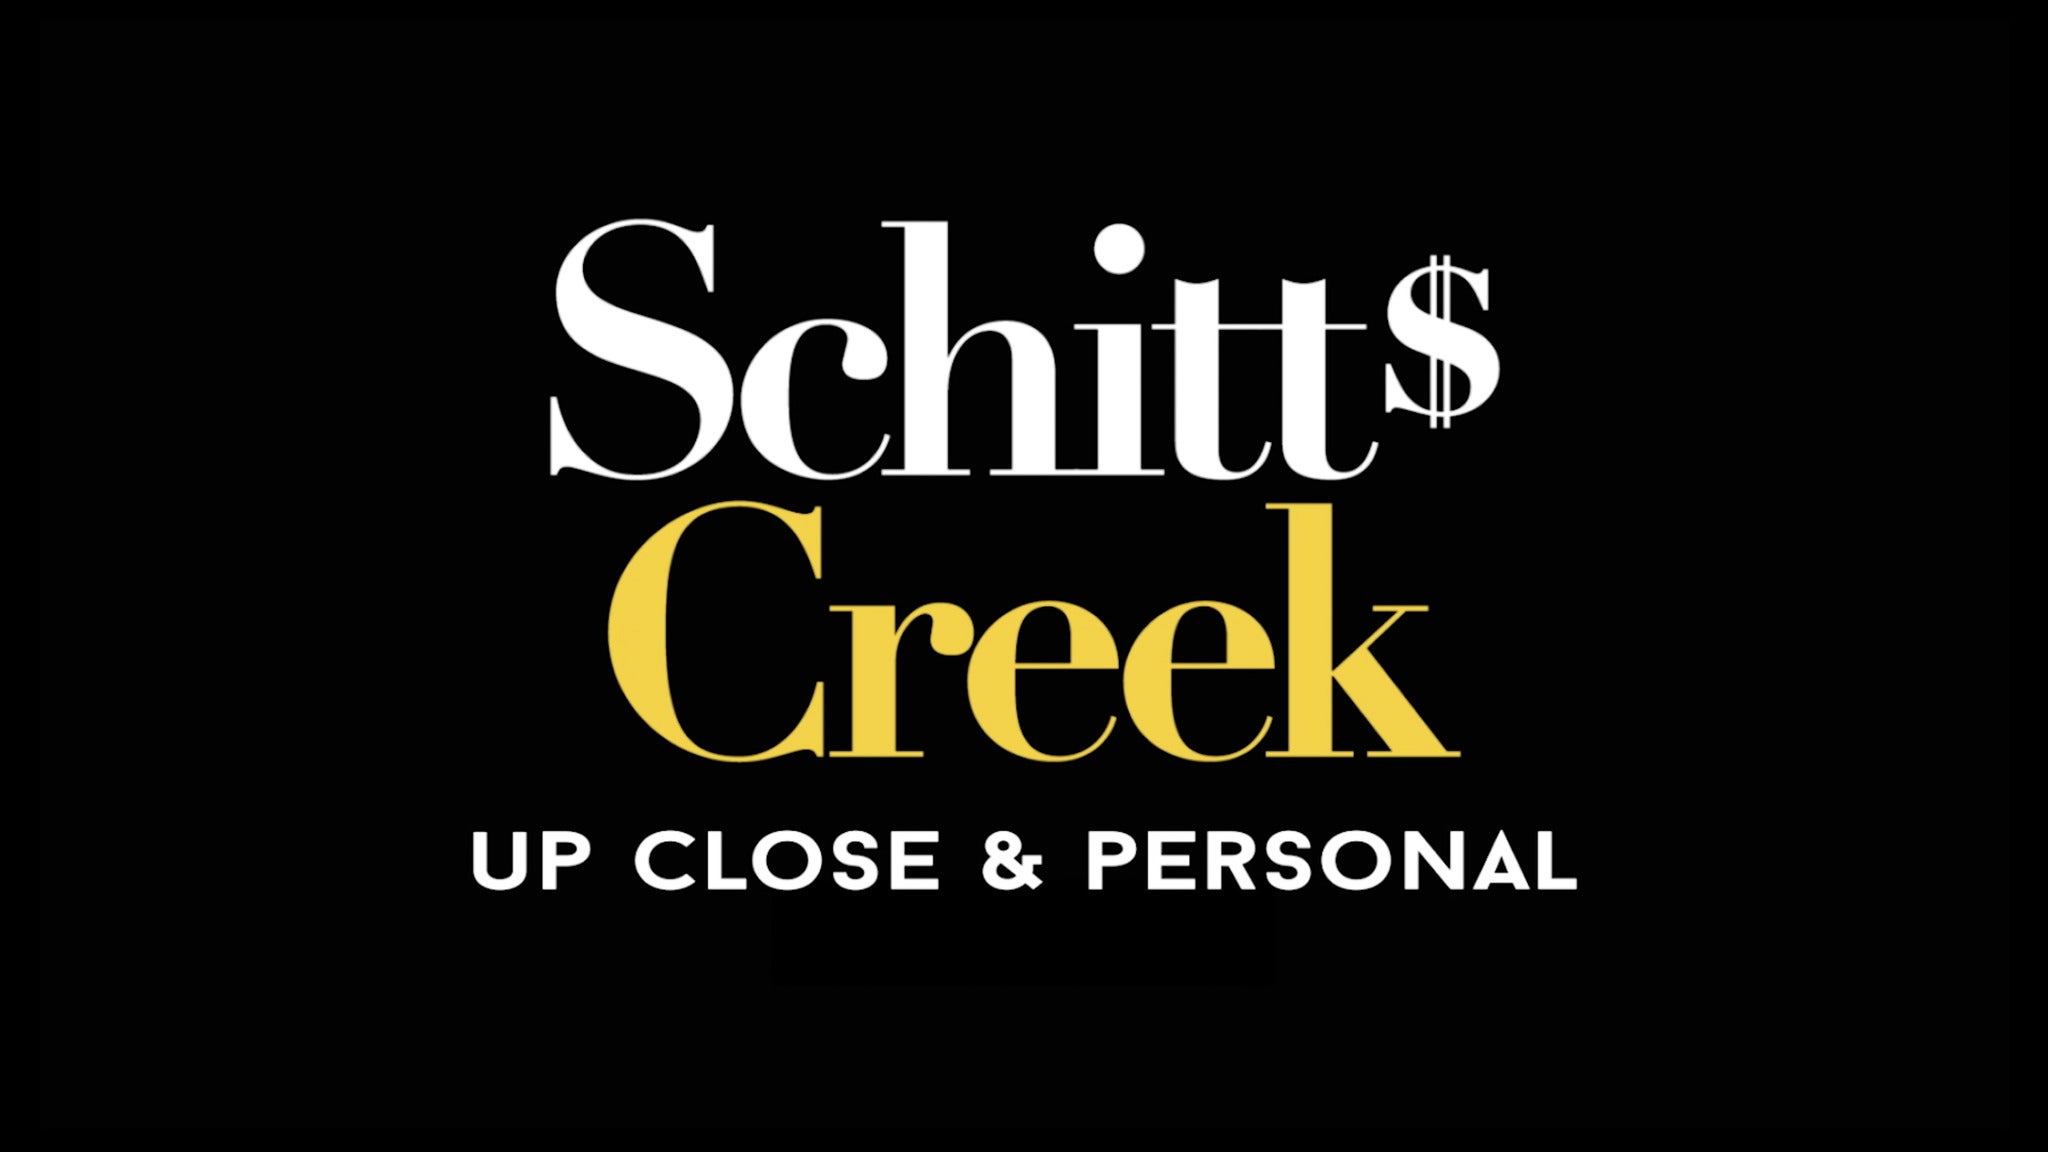 Schitt's Creek: Up Close & Personal in Washington promo photo for Live Nation presale offer code